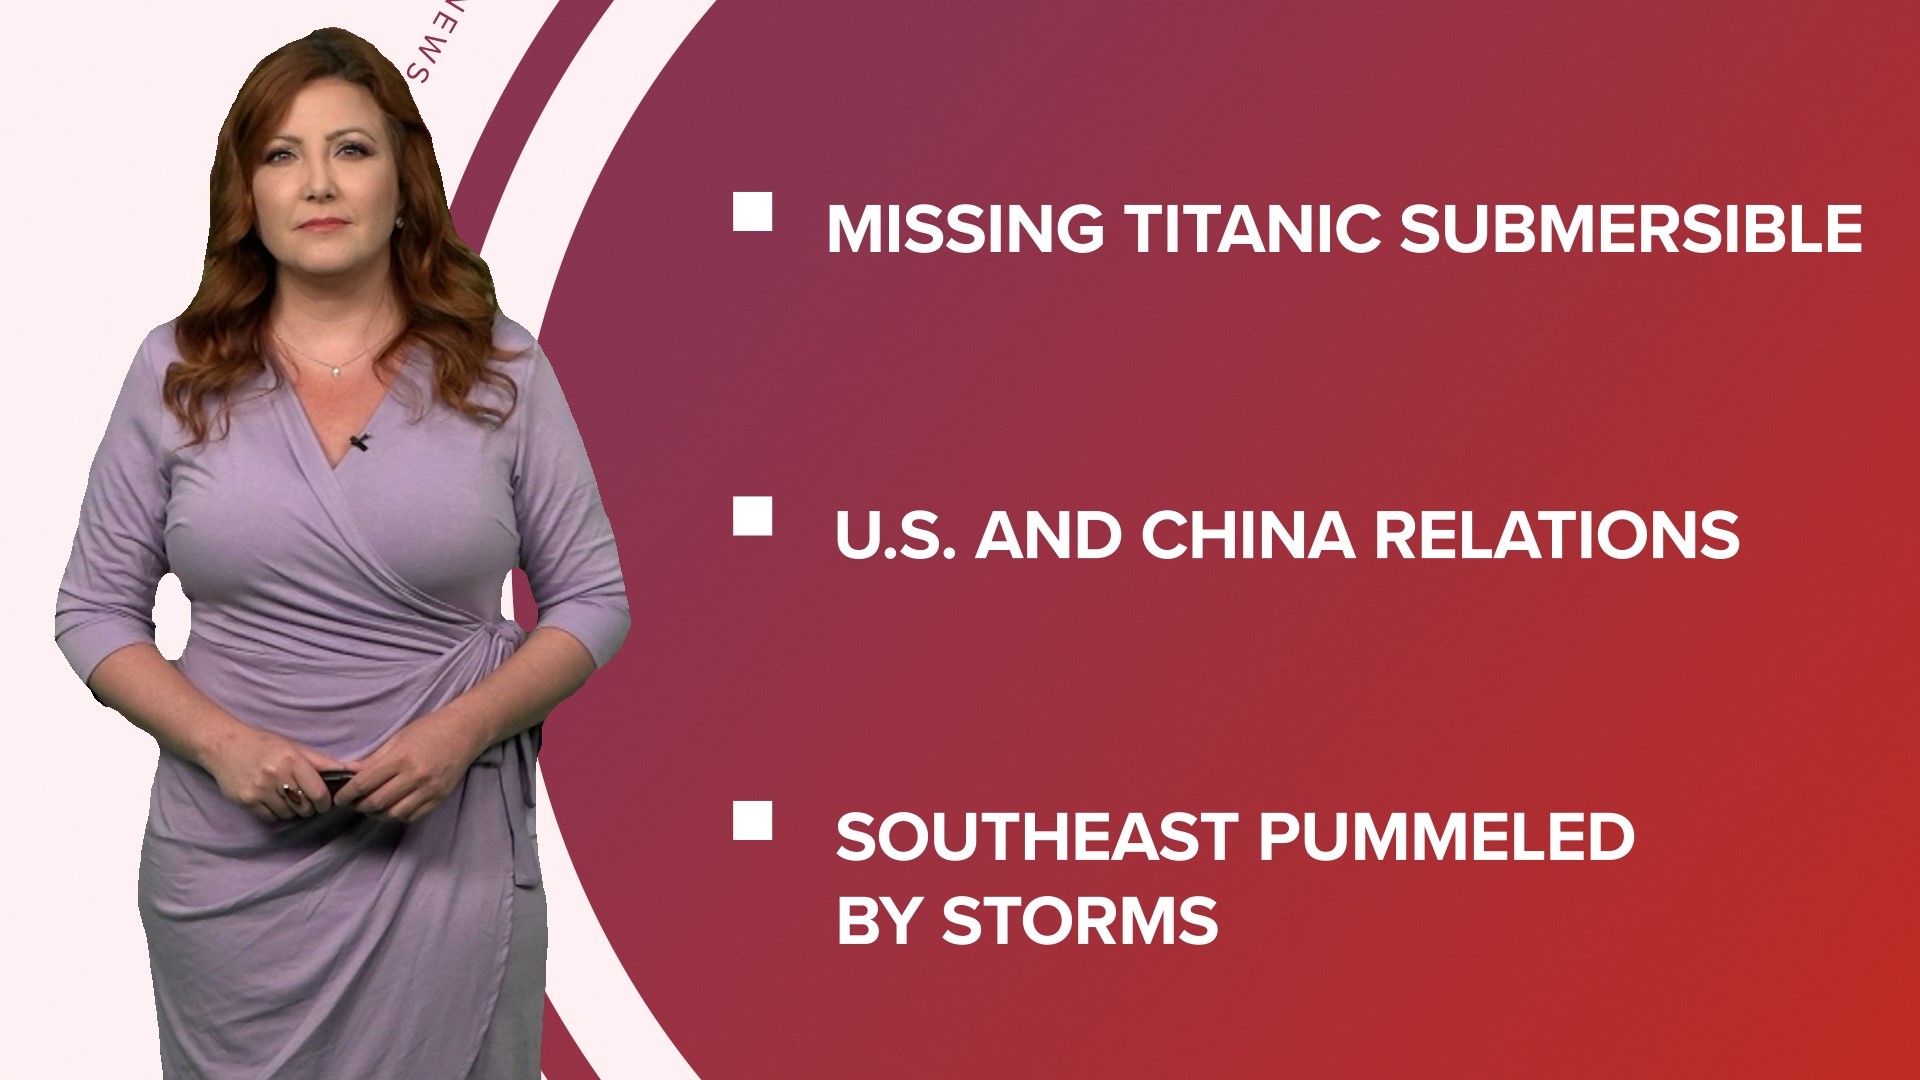 A look at what is happening in the news from a missing submersible near the Titanic wreckage to tornadoes hitting the Southeast and a pilot shortage impacts travel.